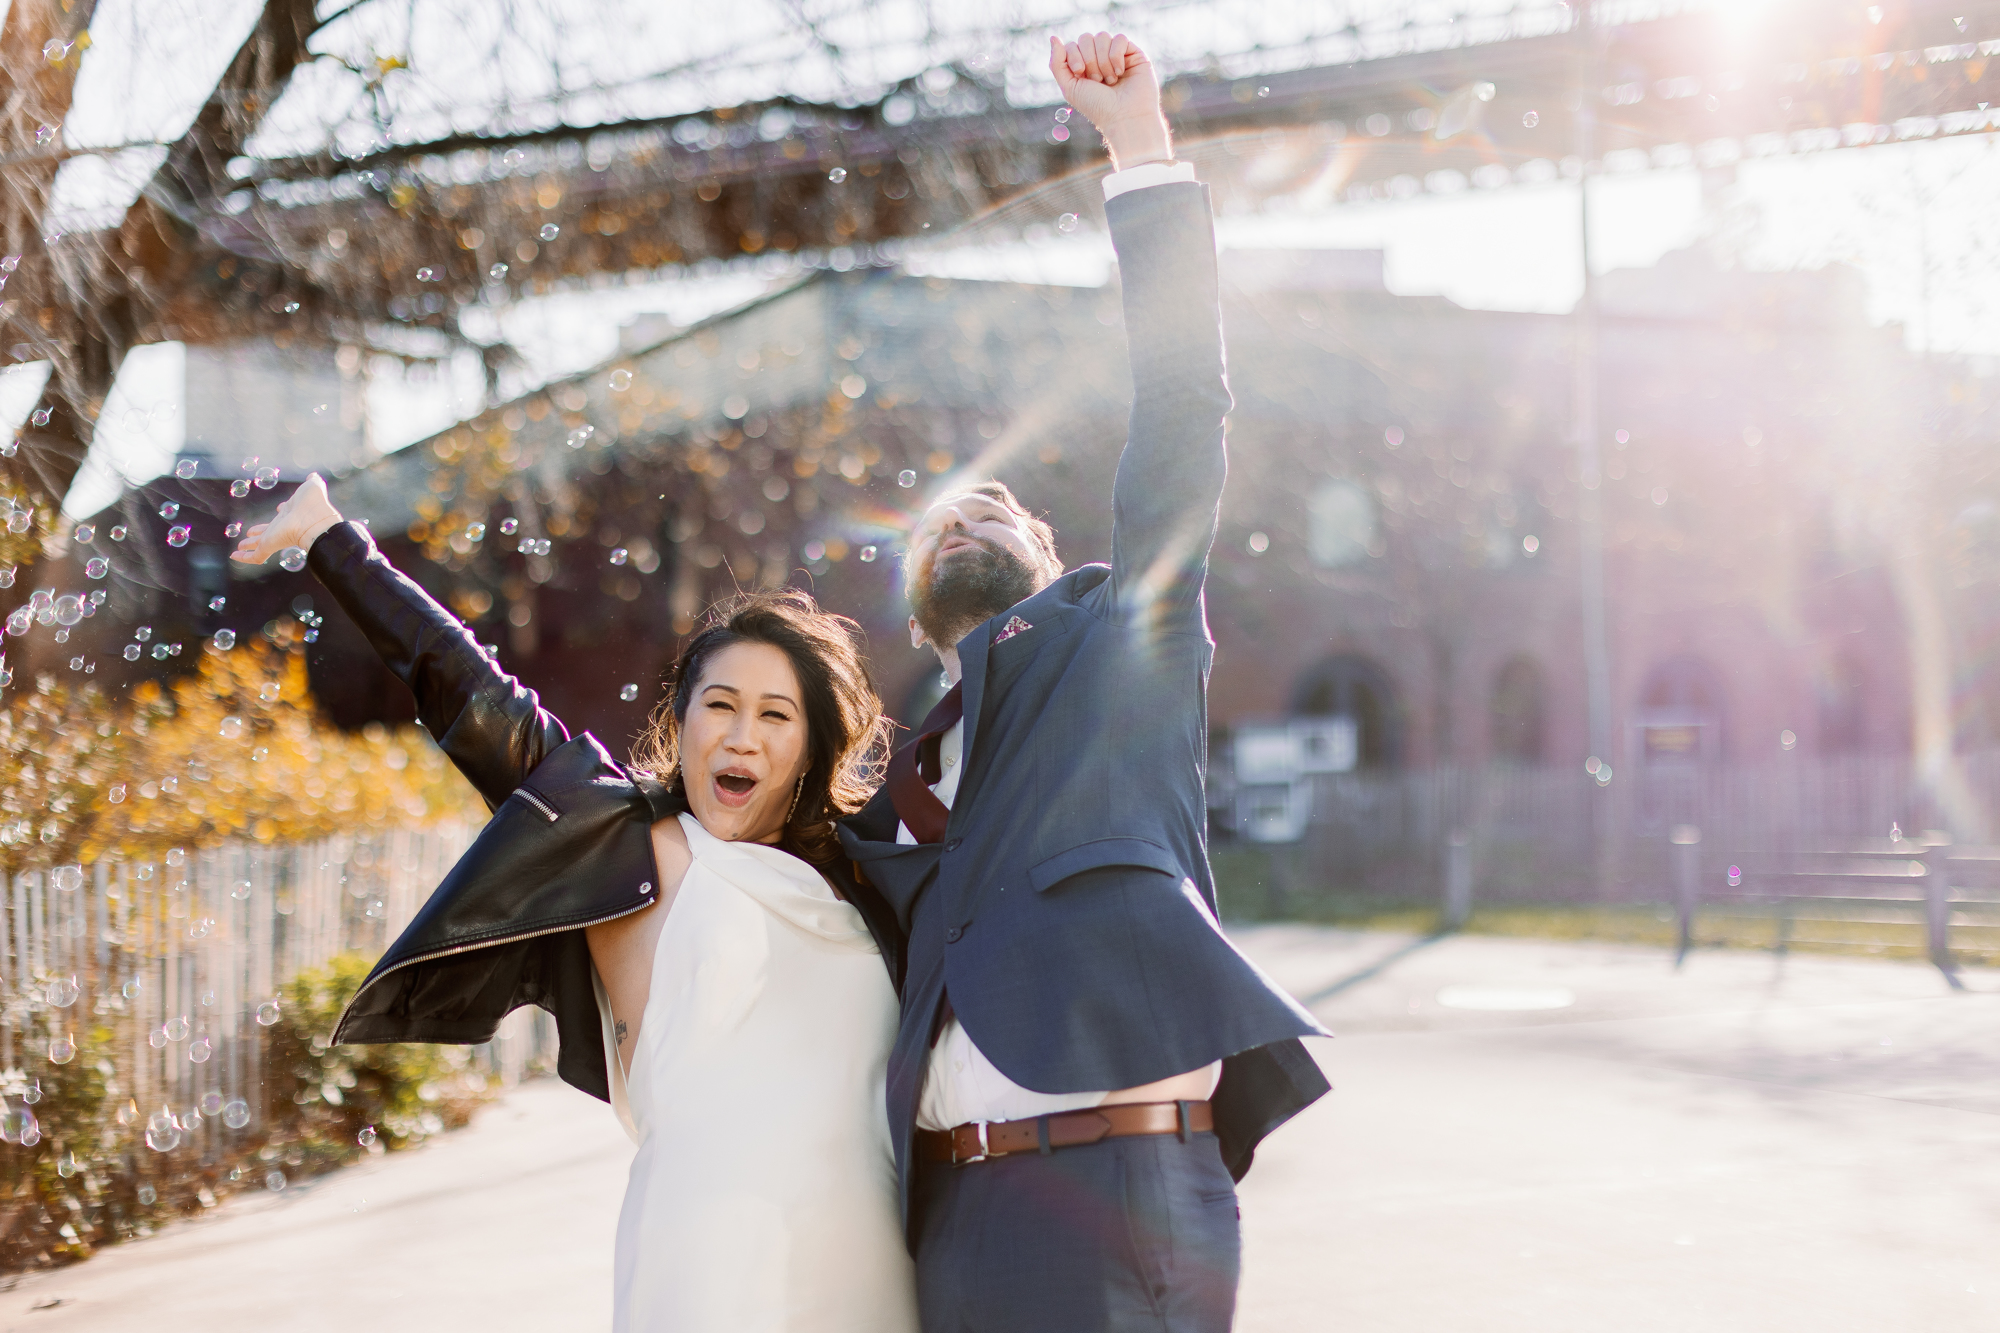 Gorgeous Fall DUMBO Elopement with New York views and foliage